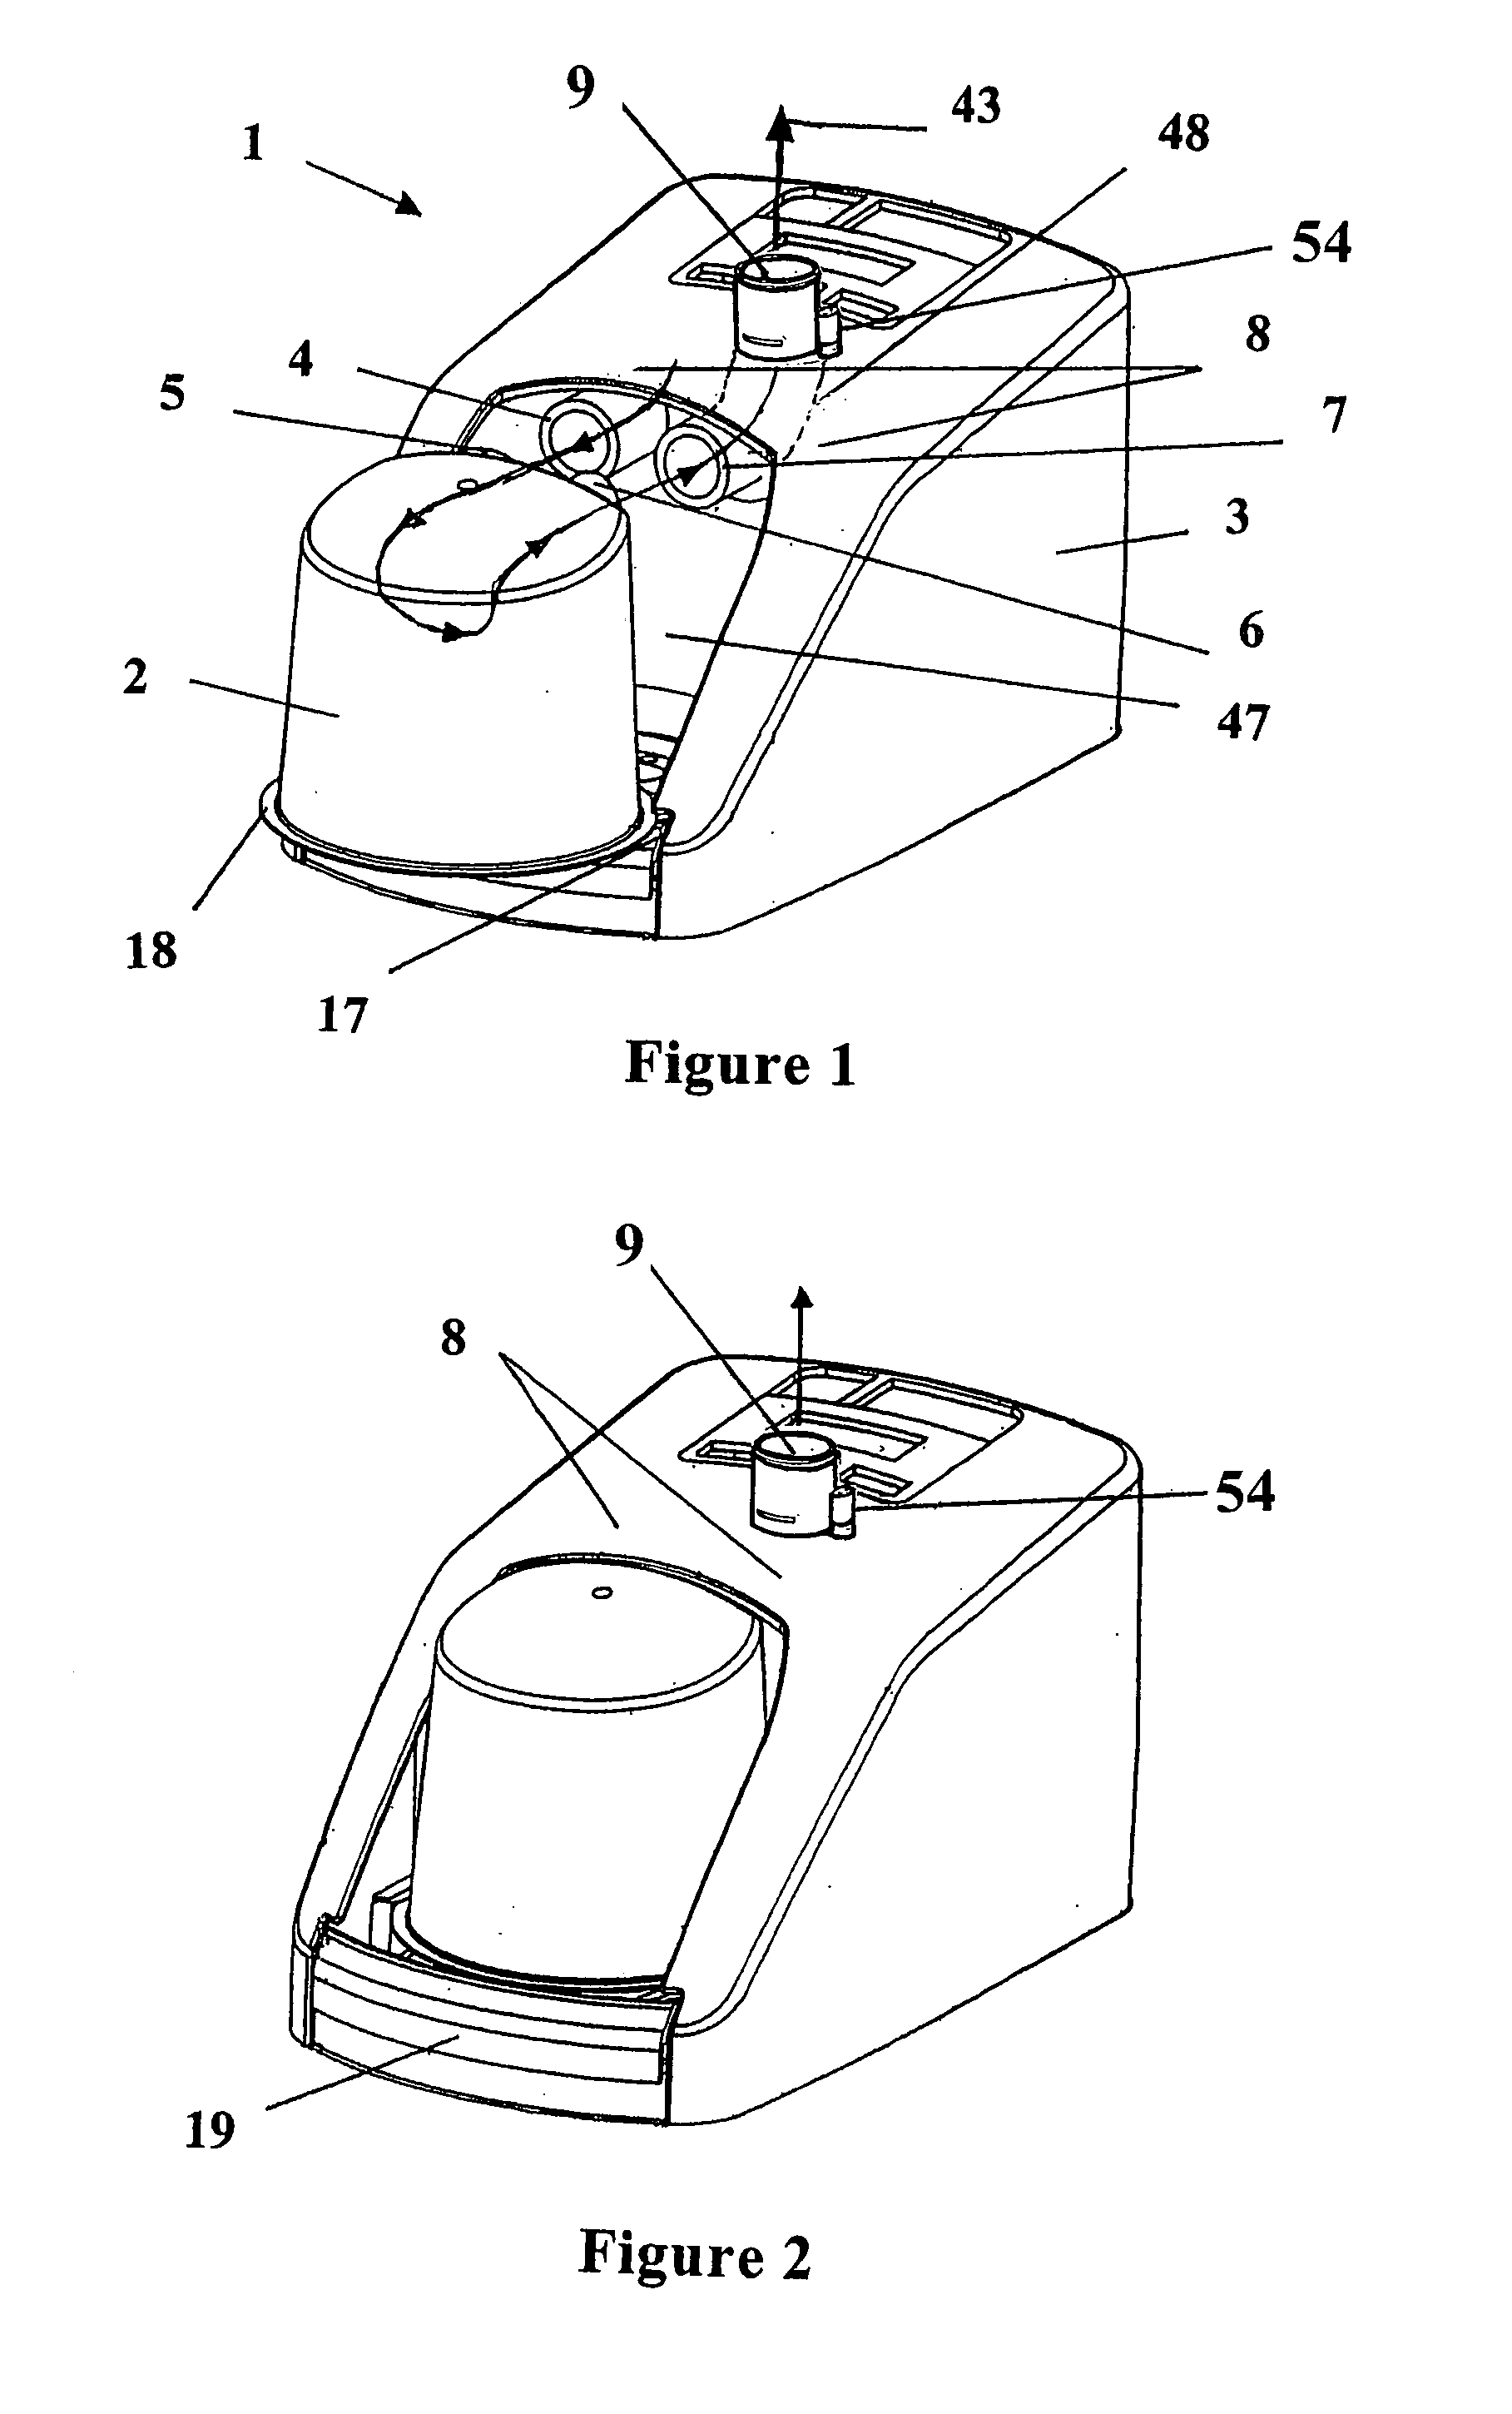 Apparatus for delivering humidified gases